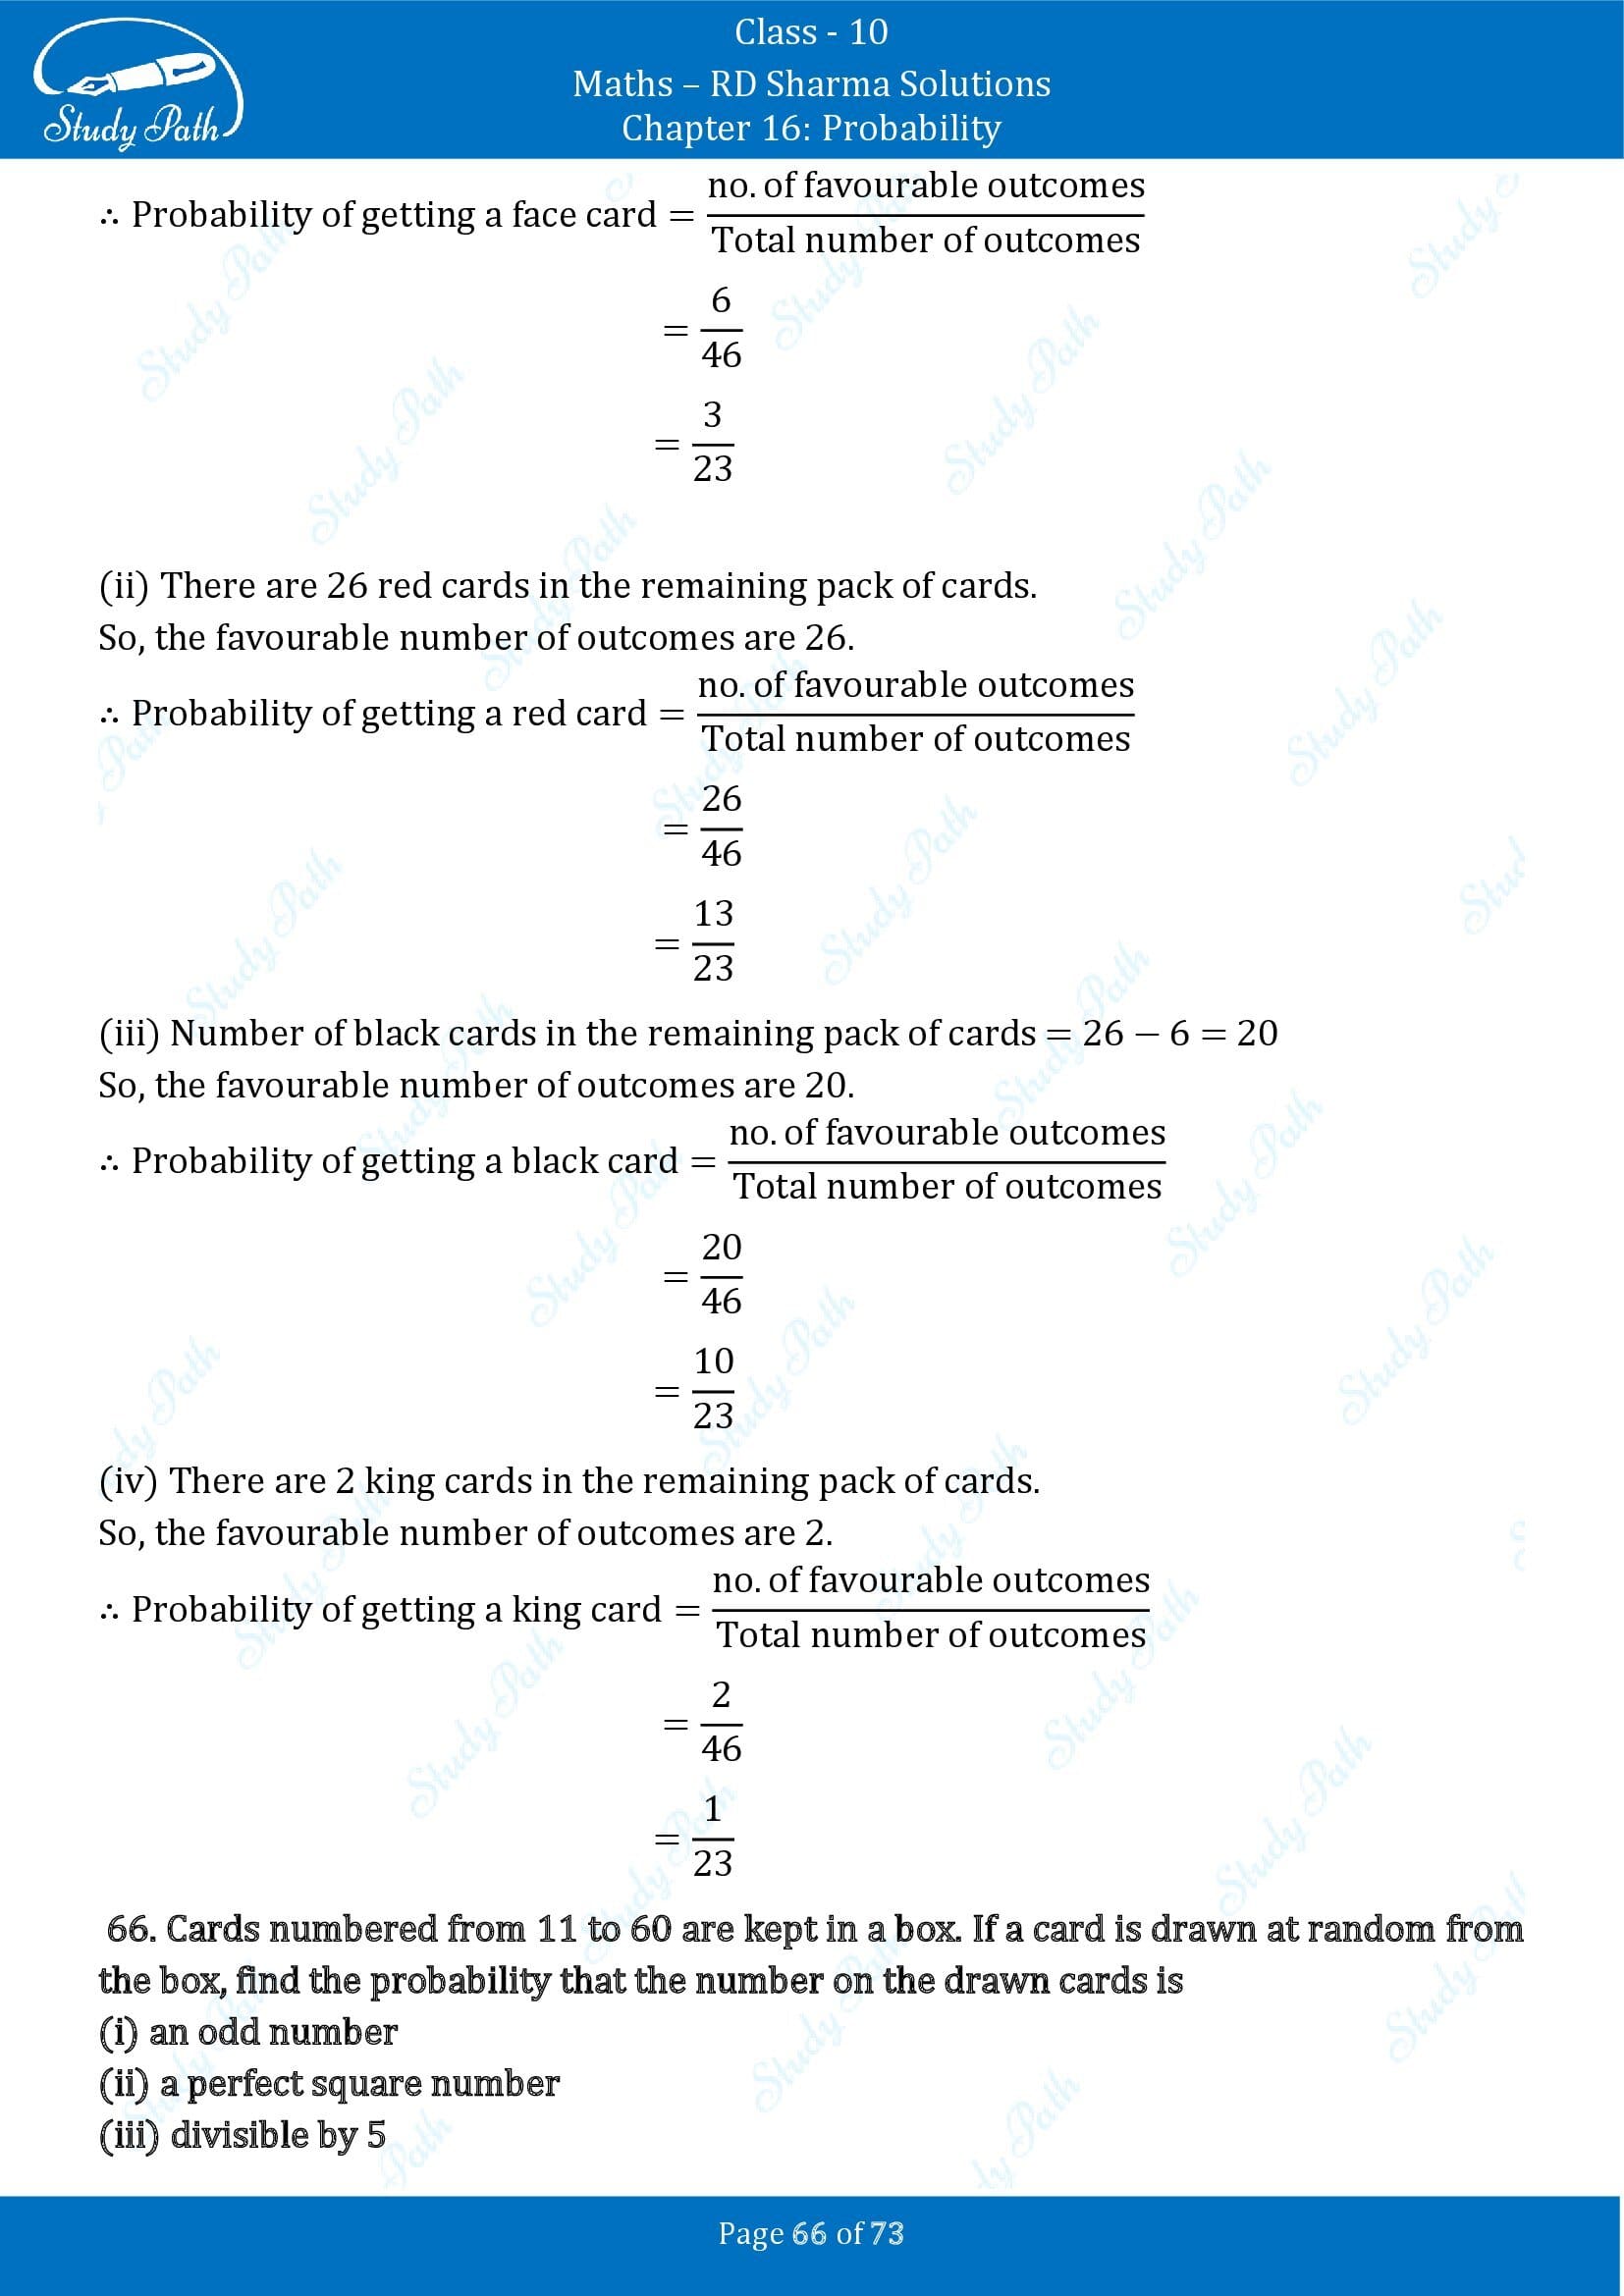 RD Sharma Solutions Class 10 Chapter 16 Probability Exercise 16.1 00066